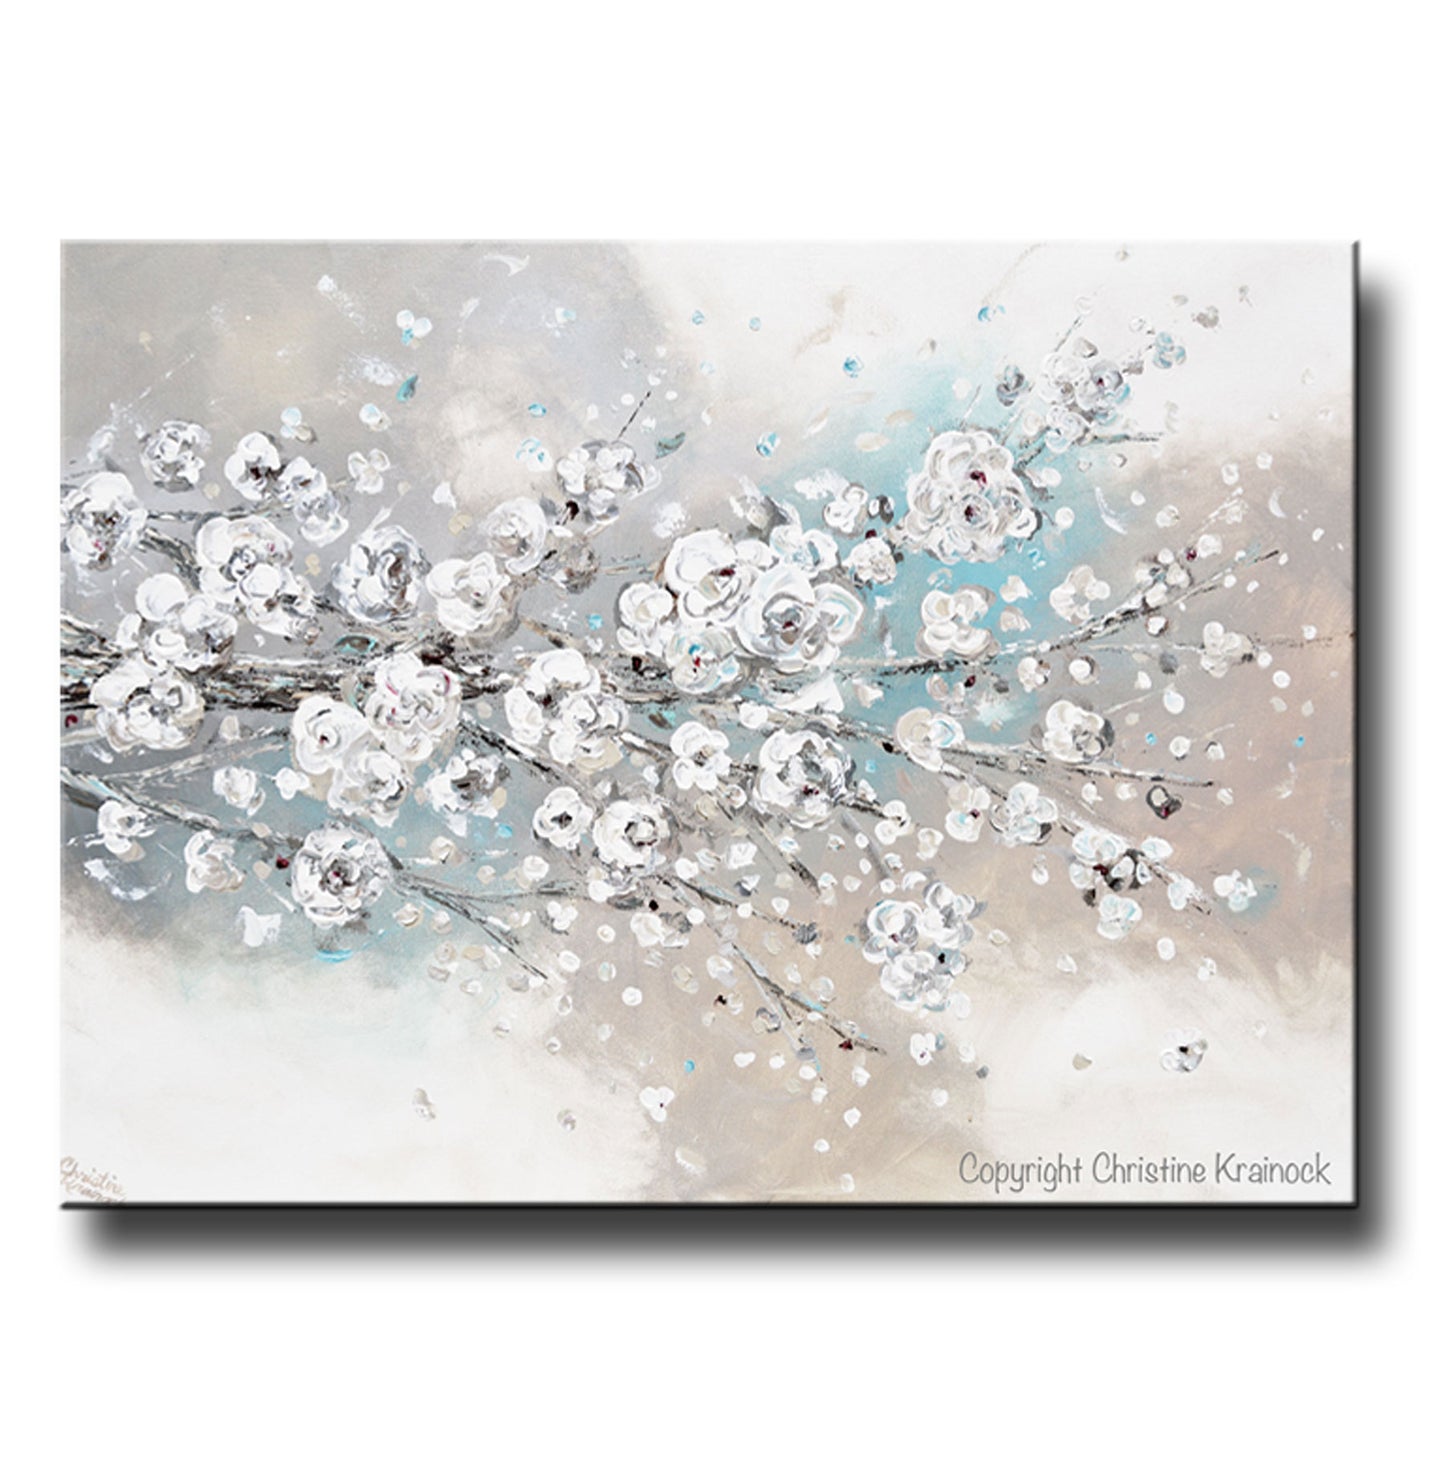 CUSTOM for LISSETTE -ORIGINAL Art Abstract Painting White Cherry Blossoms Branch Flowers White Grey Creme Blue Neutral Home Wall Decor 30x24"